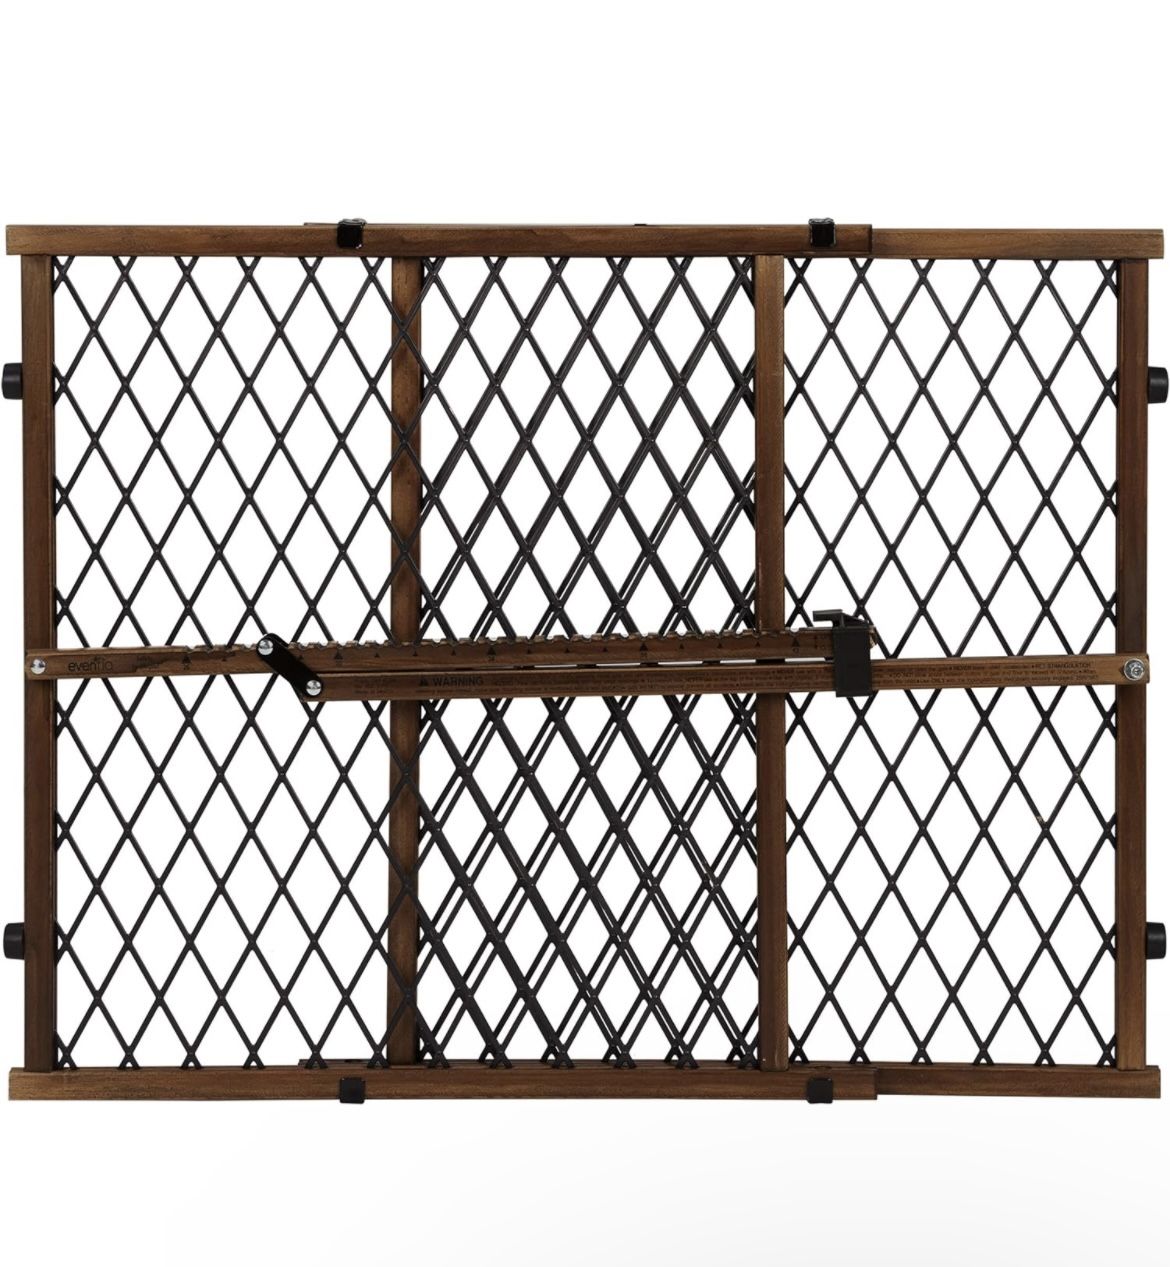 Evenflo Position & Lock Baby Gate, Pressure-Mounted, Farmhouse Collection (26” - 42” W 23” H